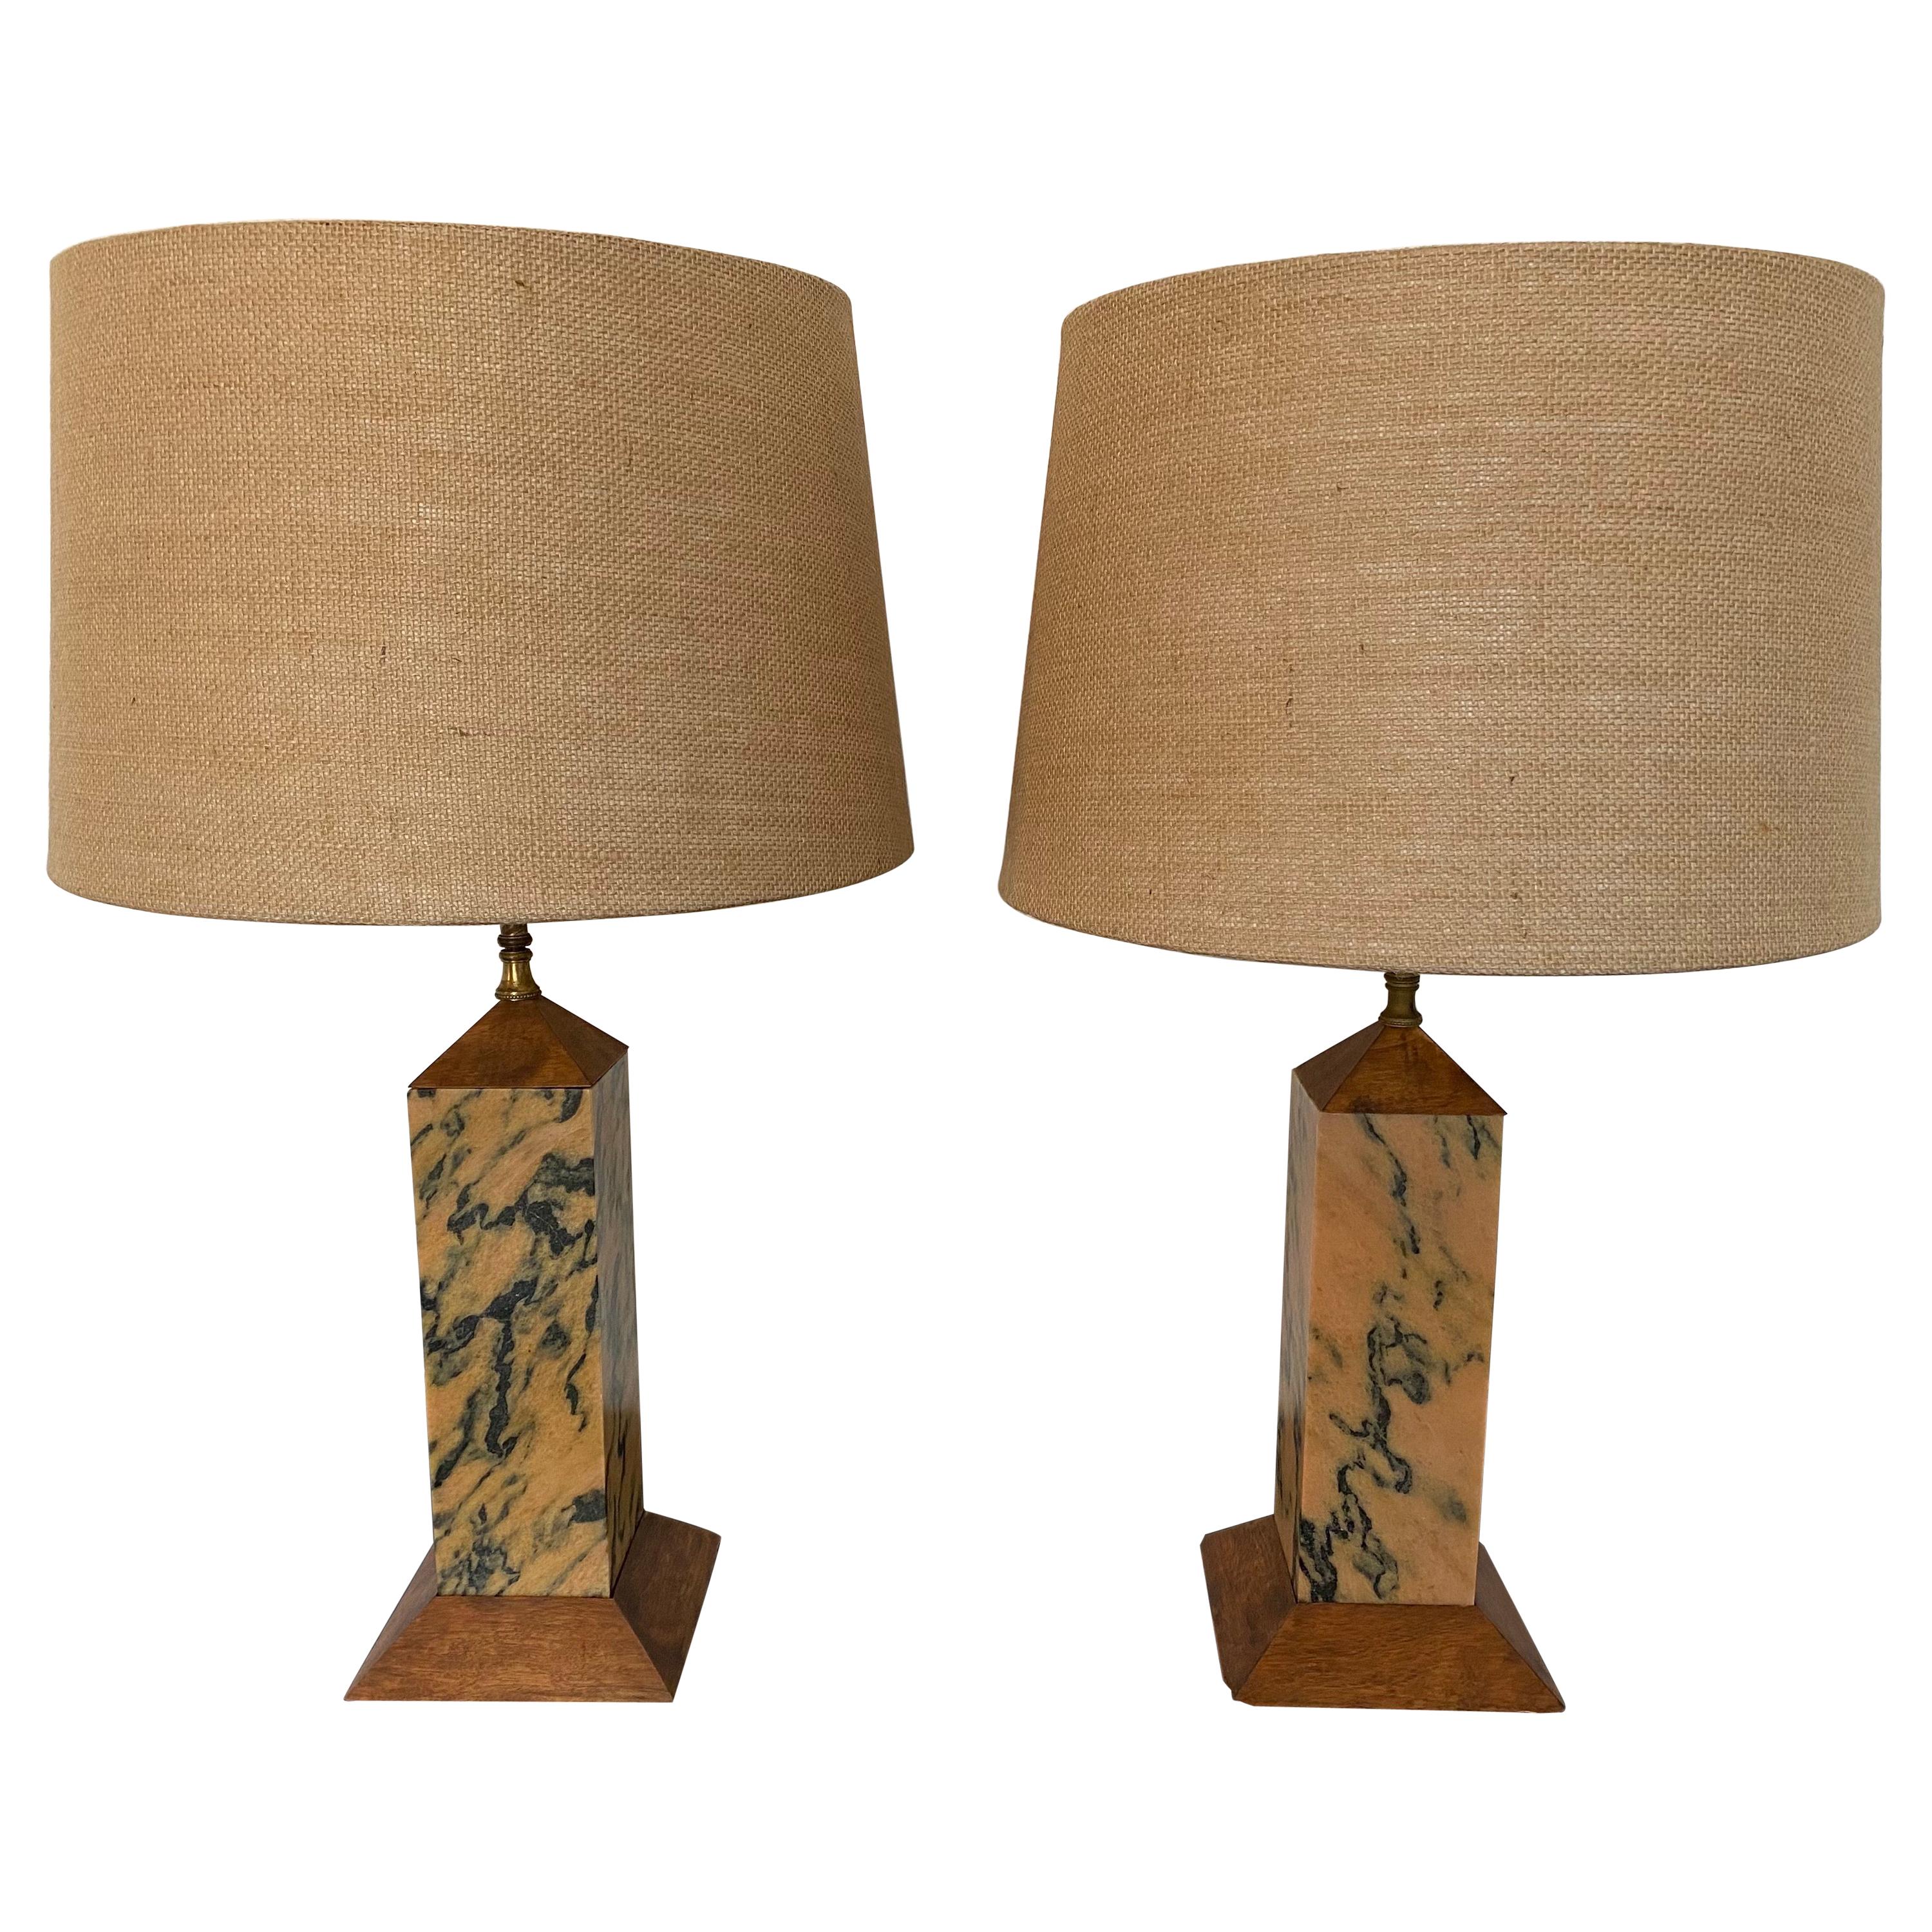 Pair of American Art Deco Mission 1920s Table Lamps